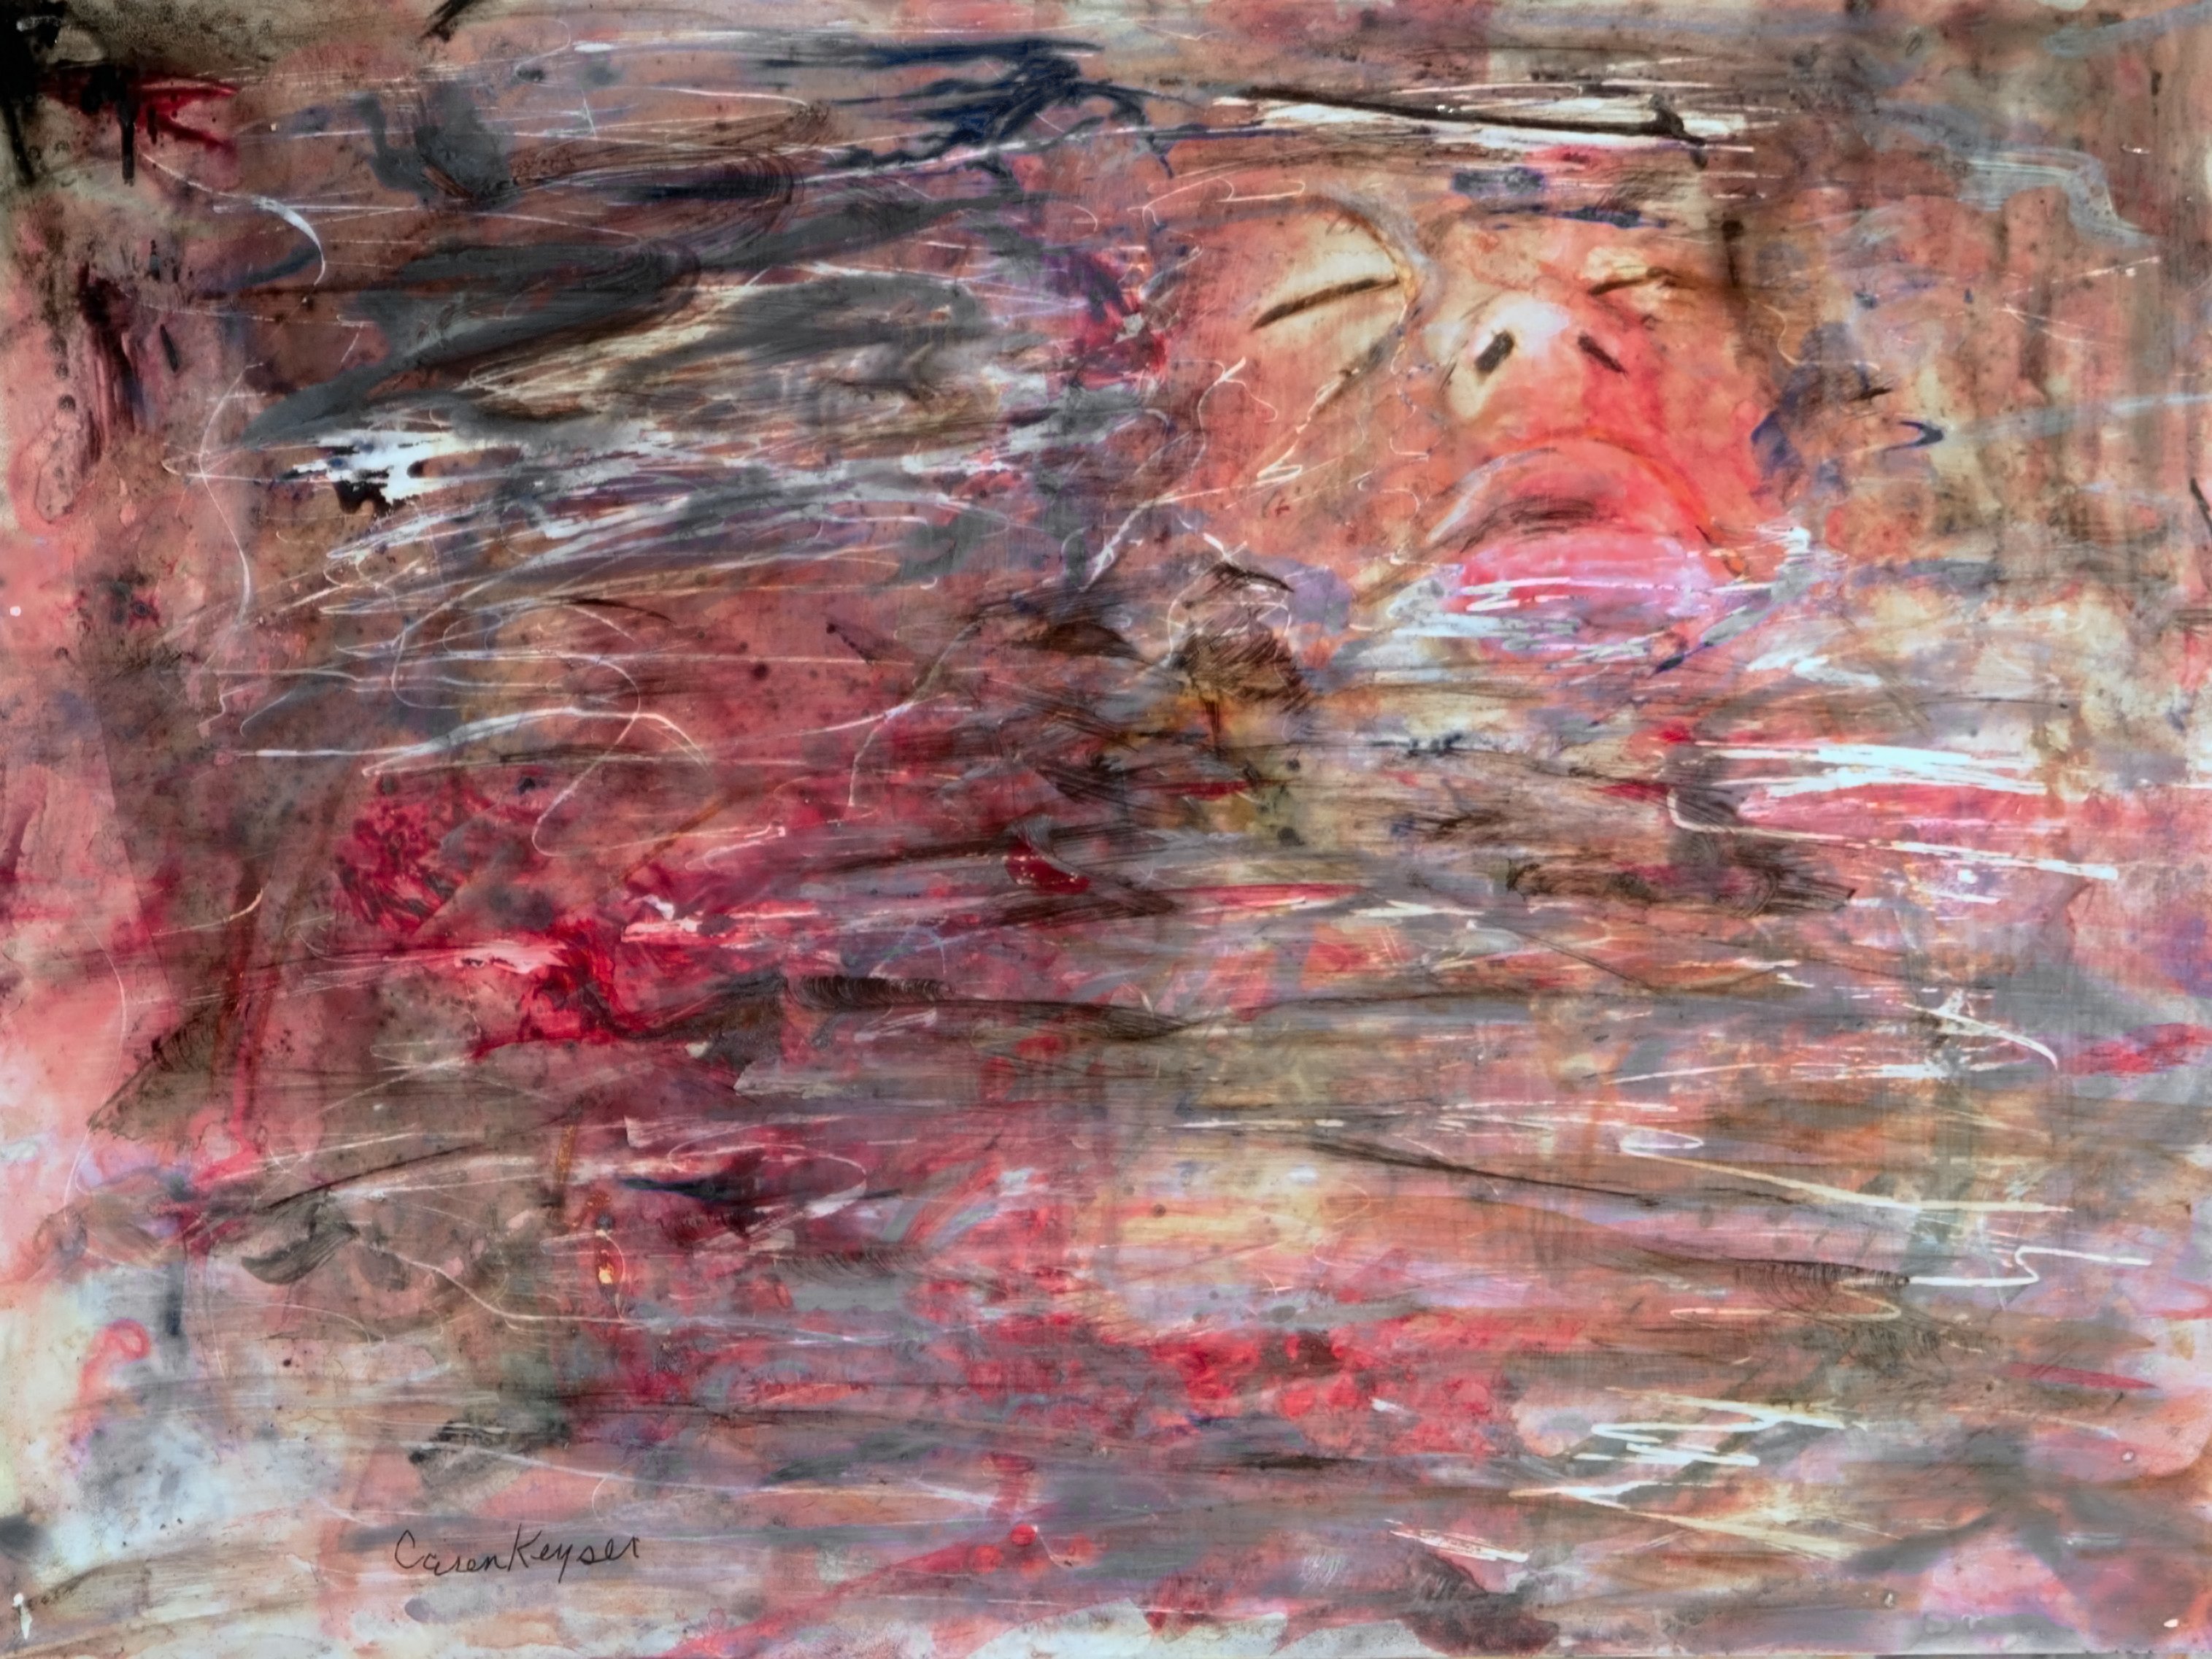 Caren Keyser, 'Blood In The Water', 2015, original Painting Acrylic, 12 x 11  cm. Artwork description: 1911 The victim has drowned.  Her face barely shows above the surface of the water.  It is a troubling image but suited to the number of serial killer novels I tend to read.  The subconscious shows itself in art. ...